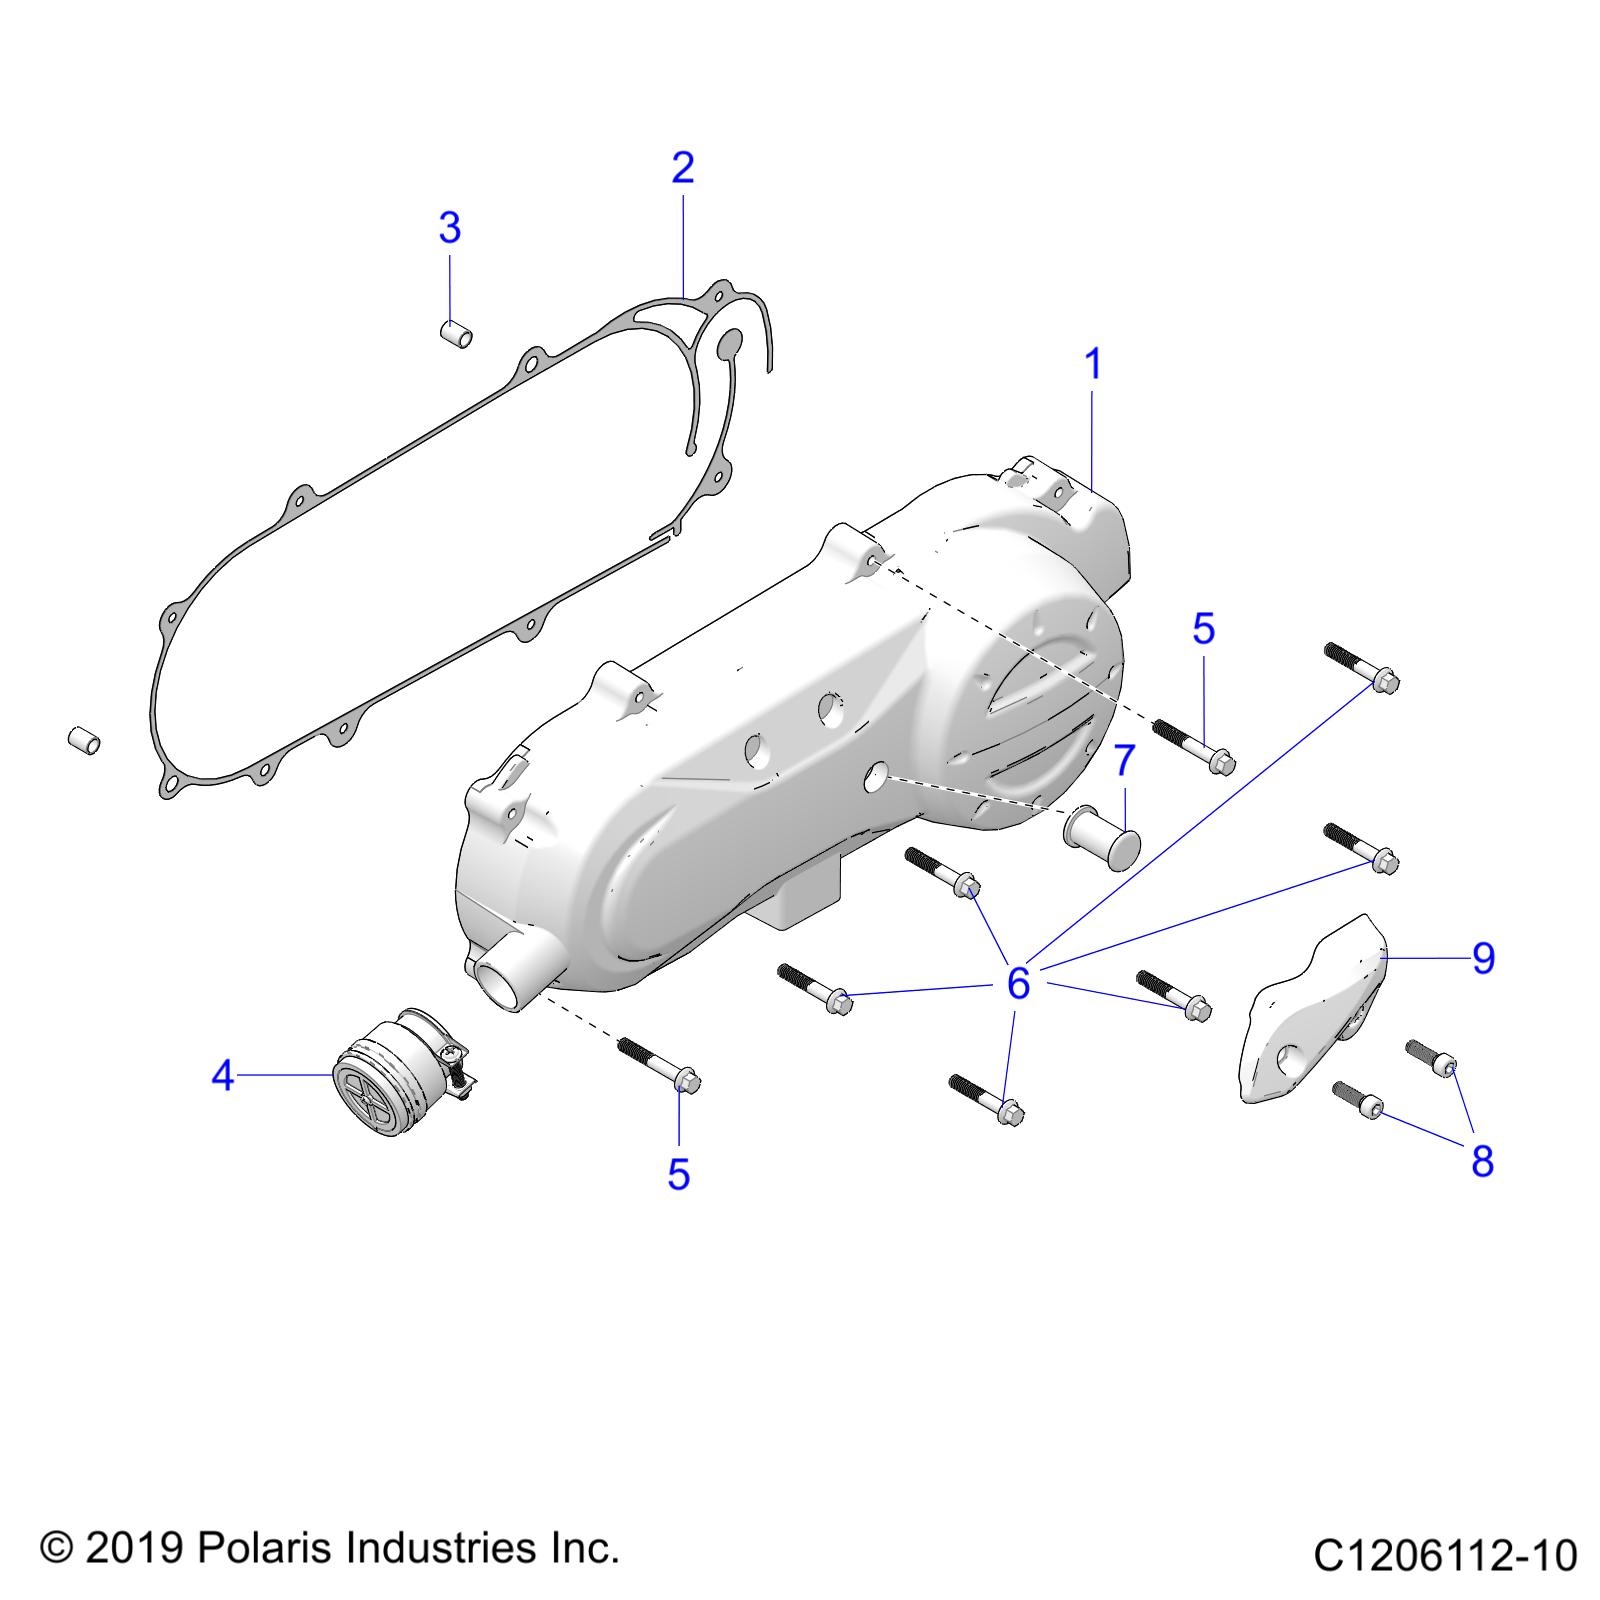 Part Number : 3023893 GASKET COVER CRANKCASE LH